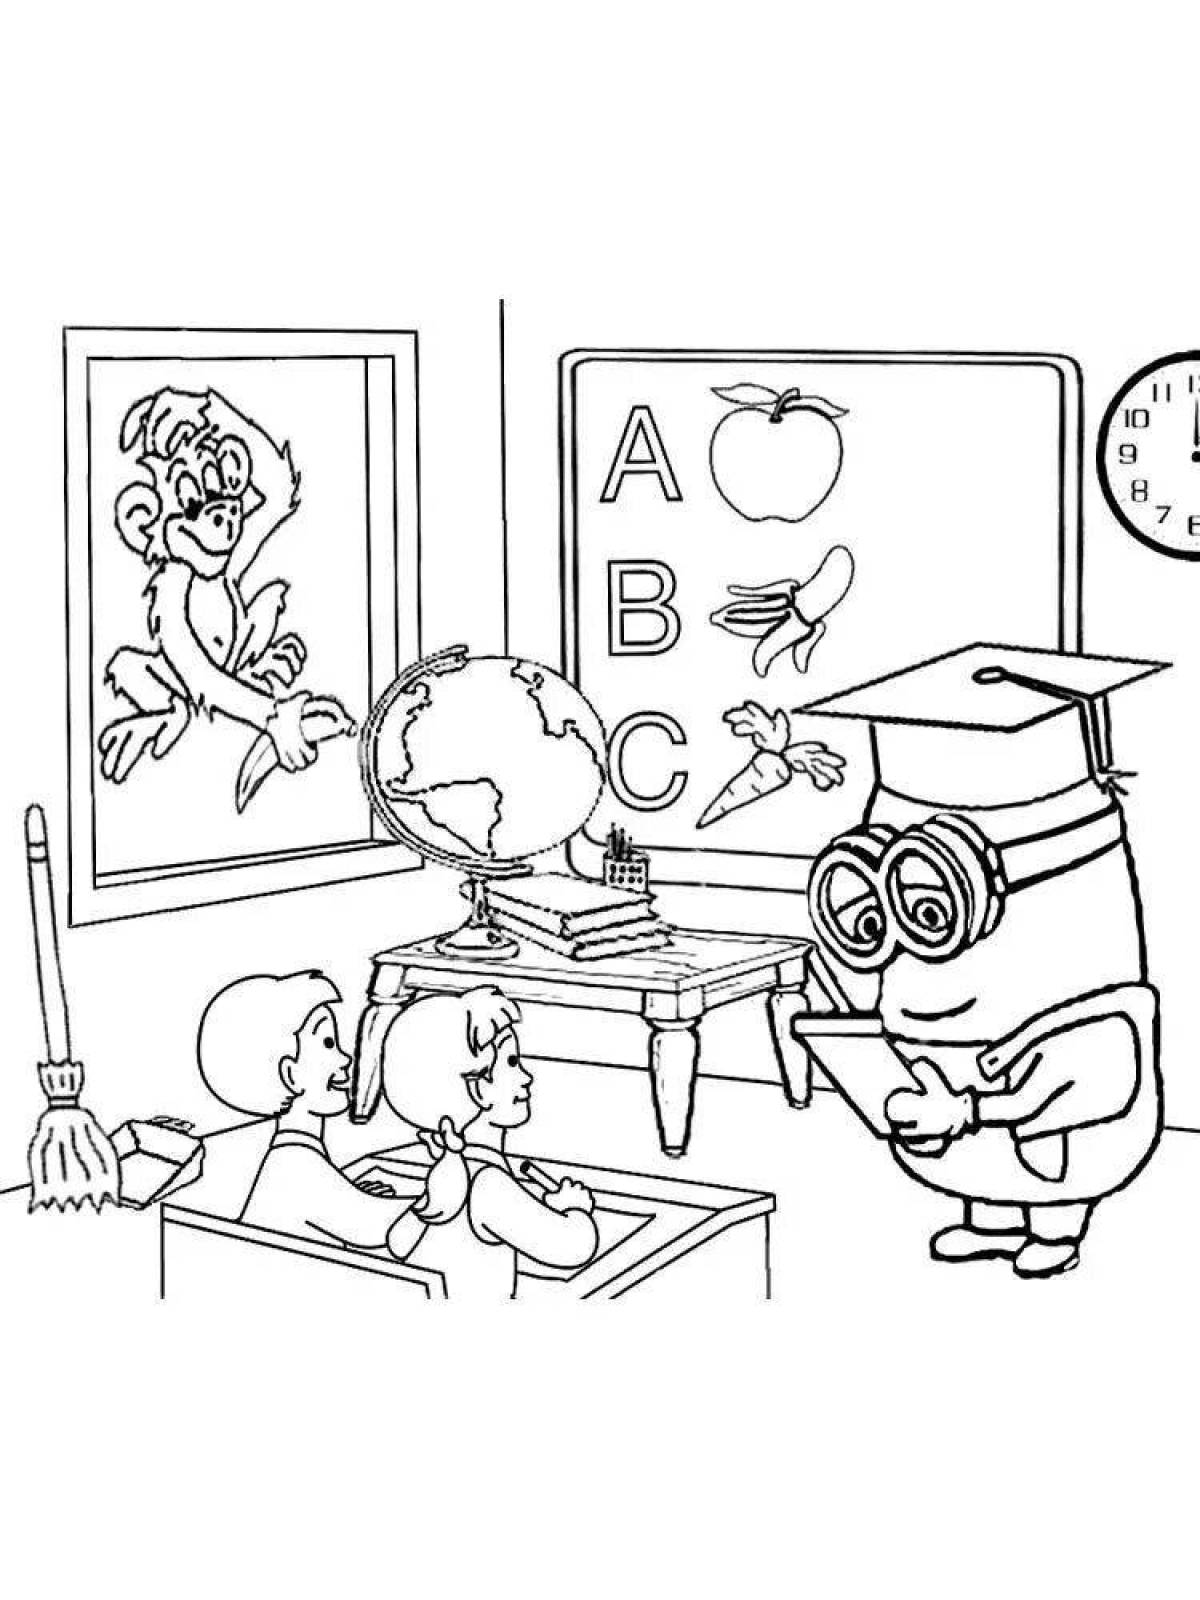 Colorful class scene coloring page